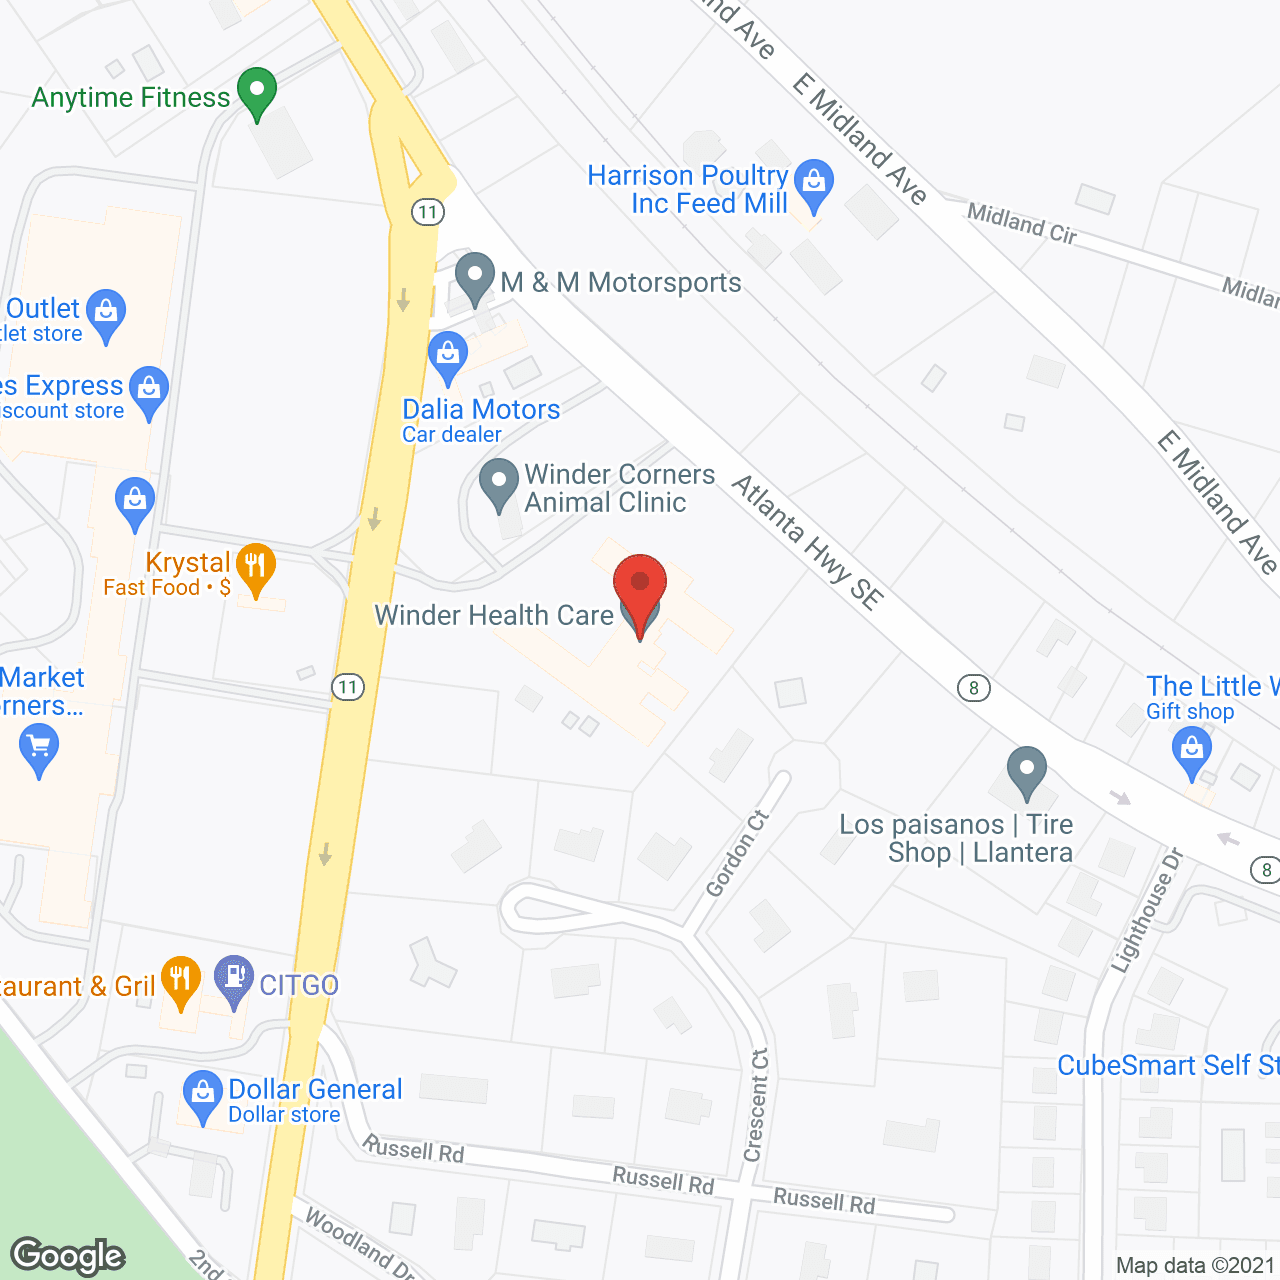 Russell Nursing Home in google map